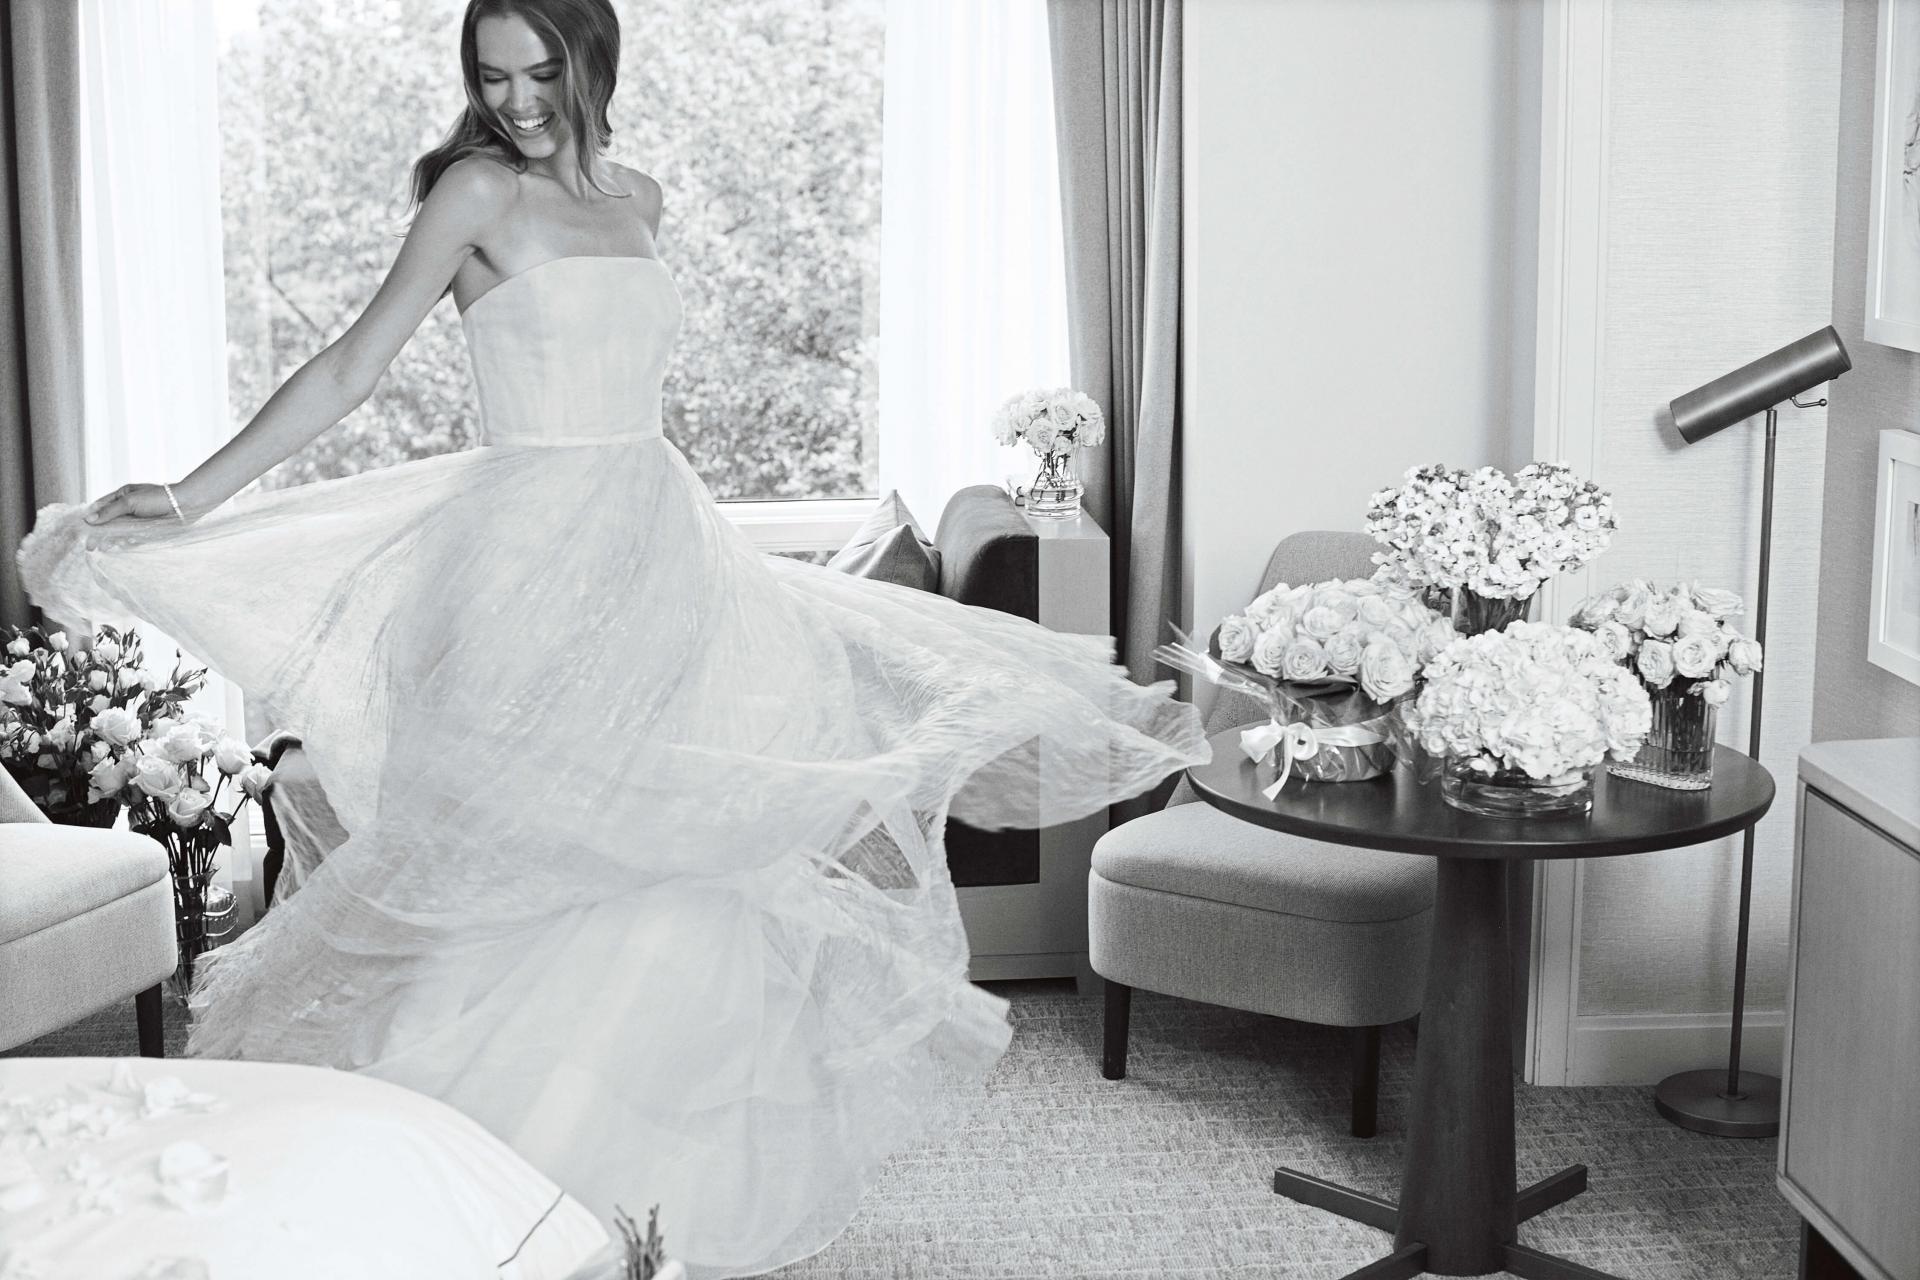 A black and white image of a woman in a white wedding dress spins in a room with bouquets of flowers sitting on table